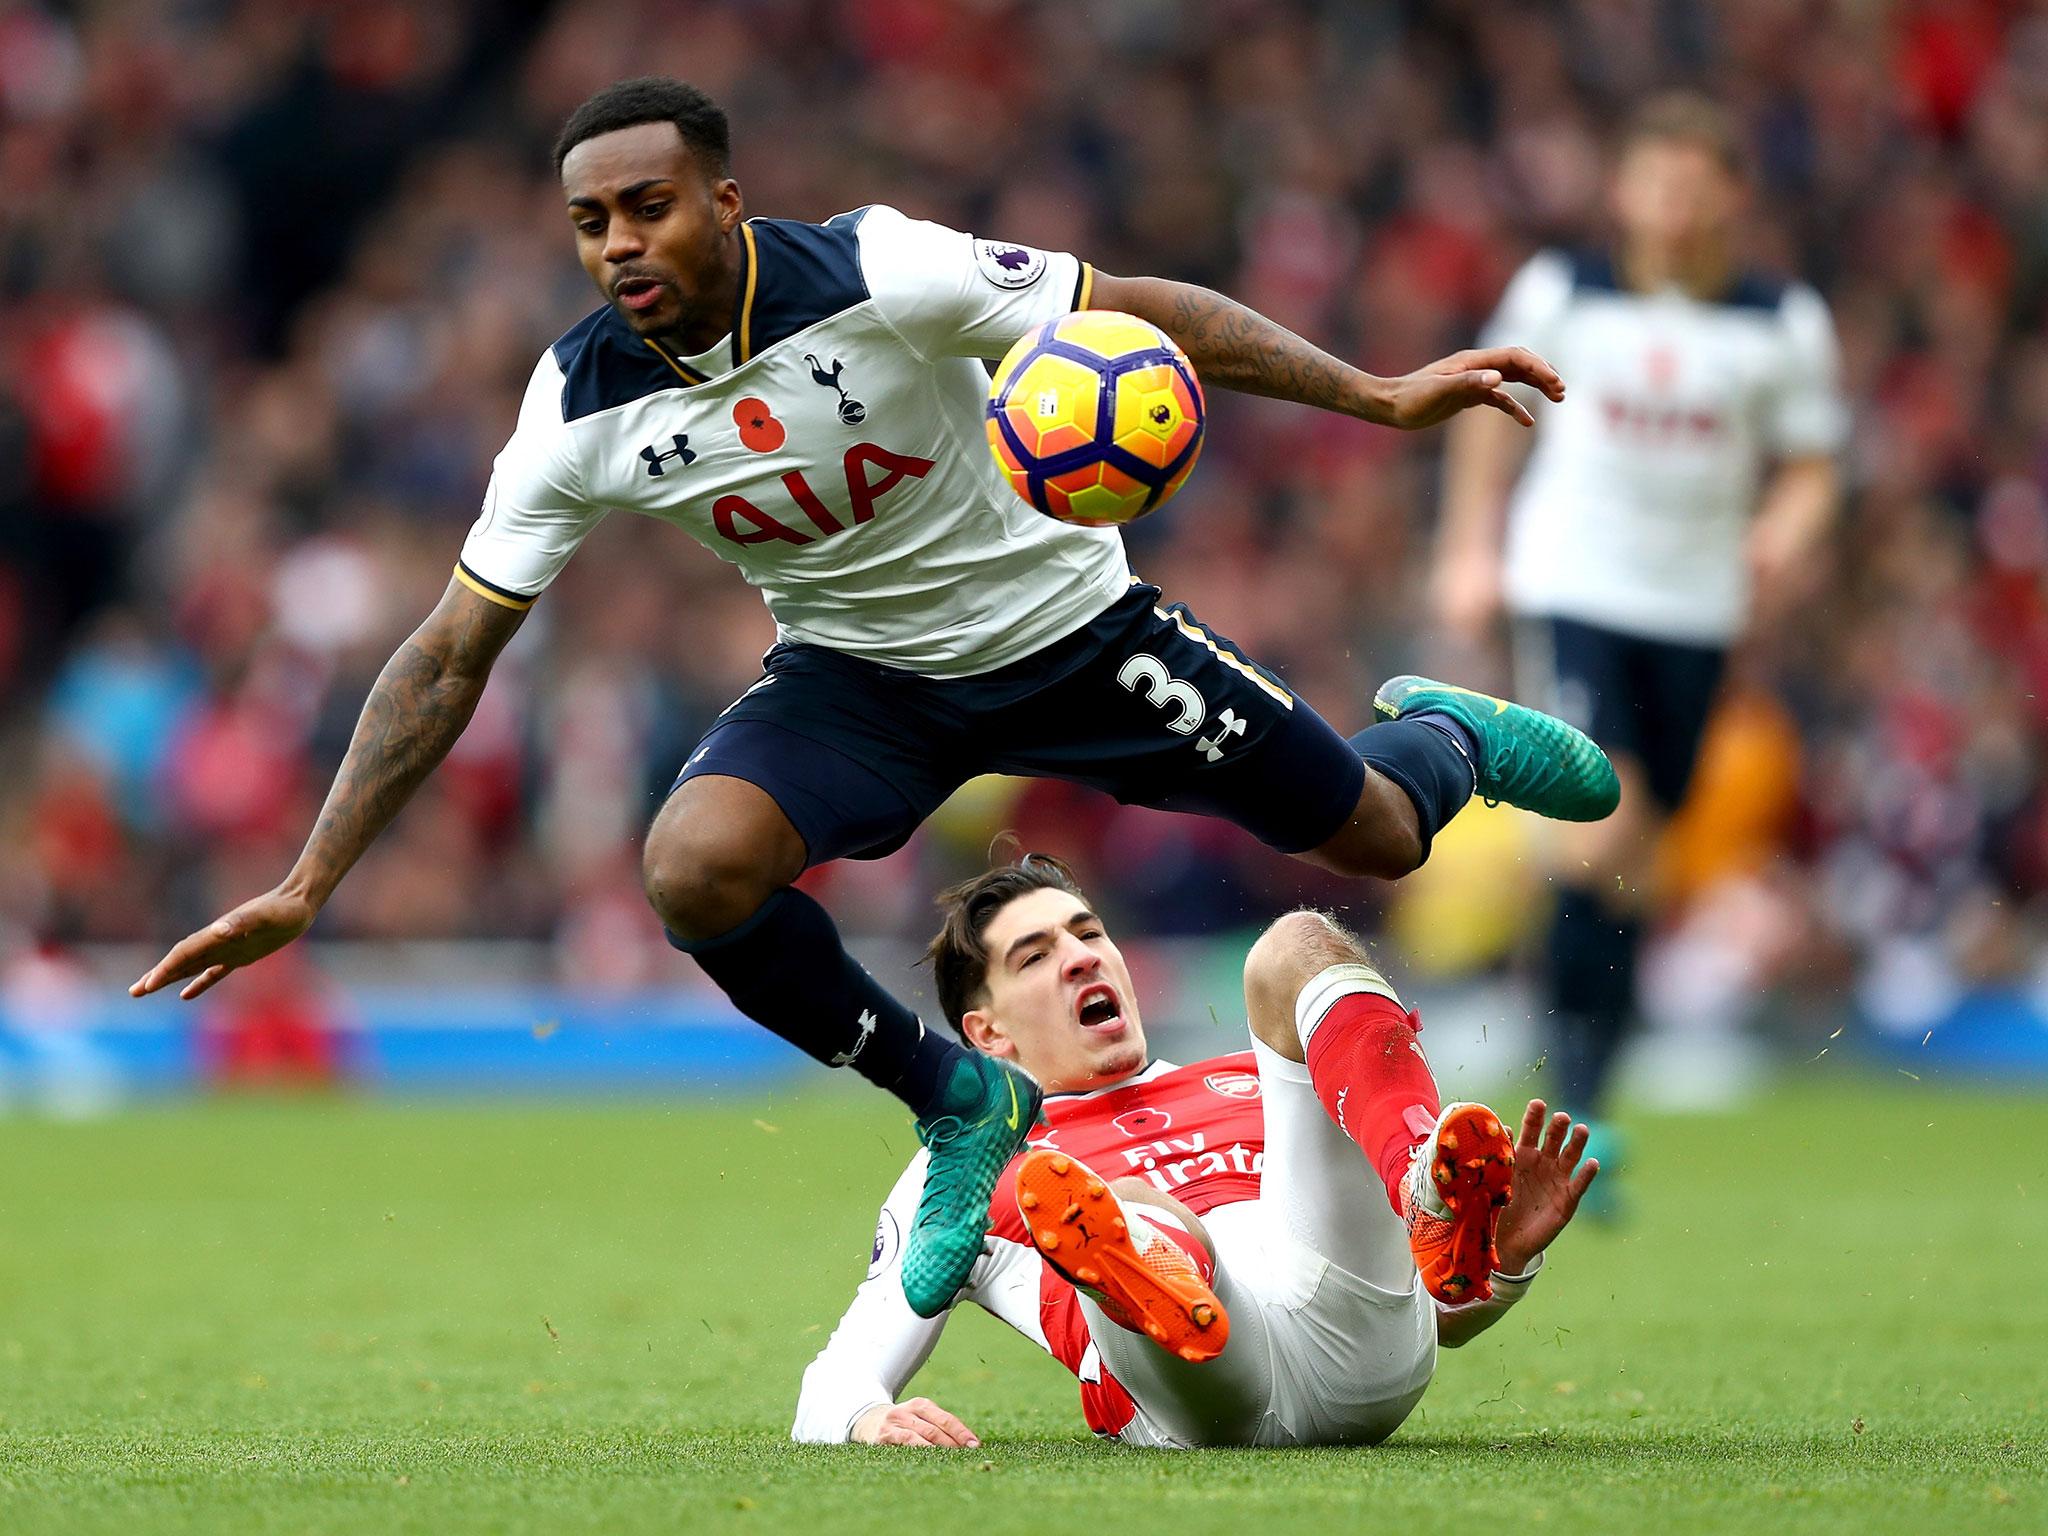 Hector Bellerin suffered injury in a clash with Danny Rose in the final 10 seconds of the north London derby